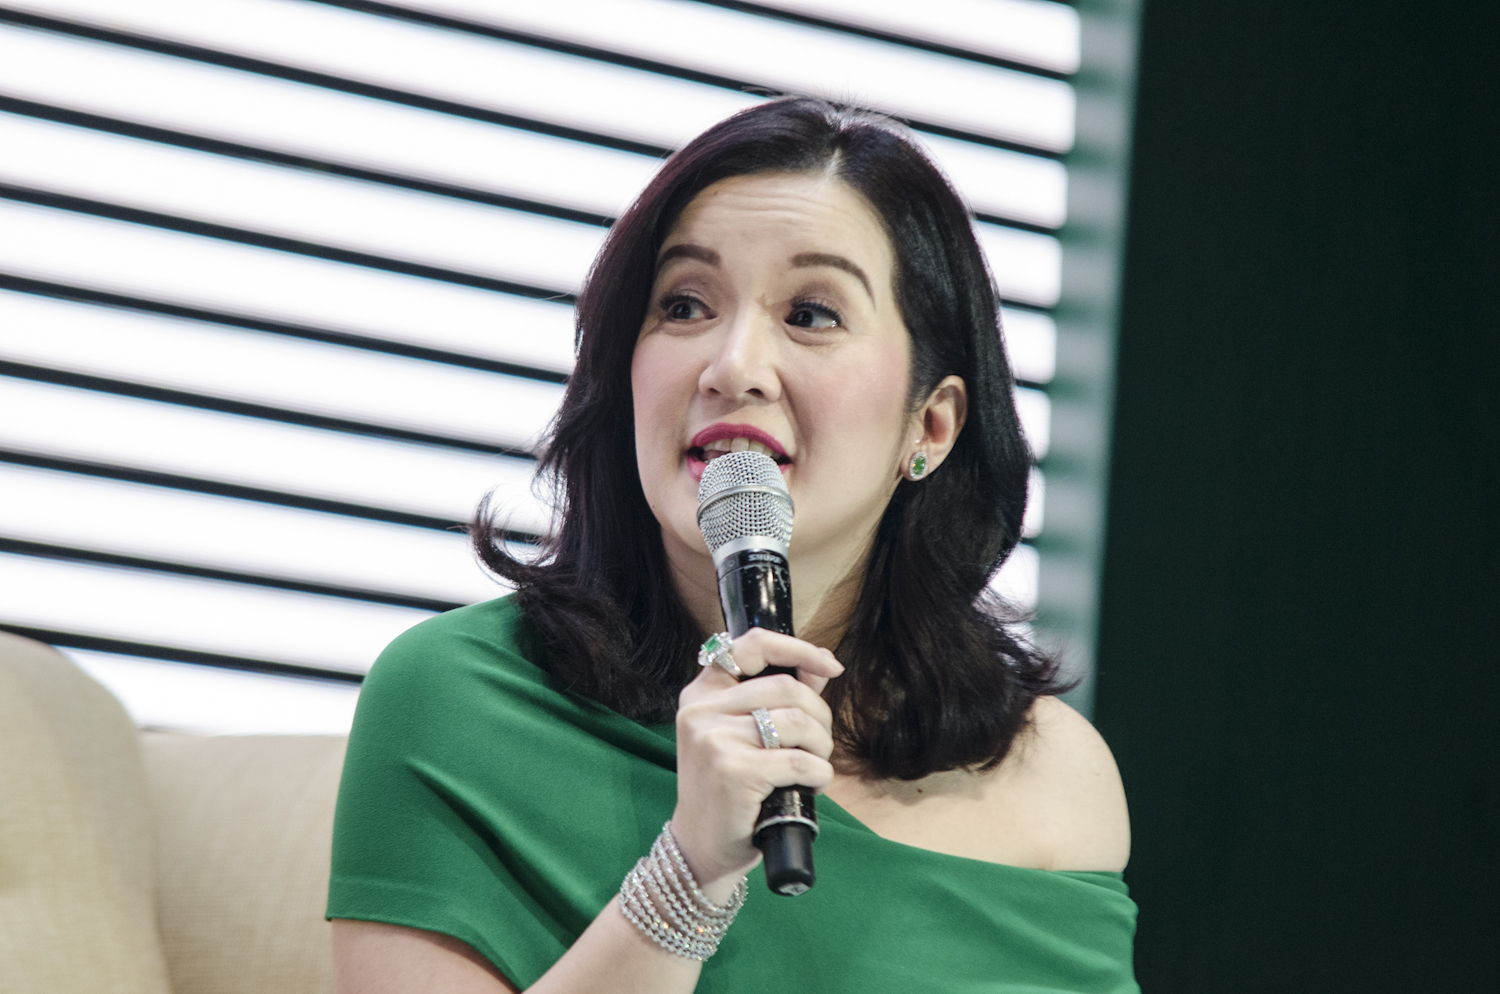 APOLOGY. Kris Aquino apologizes to 'Trip ni Kris' producer Rhodora Morales for offending her in an interview. File photo by Rob Reyes/Rappler 